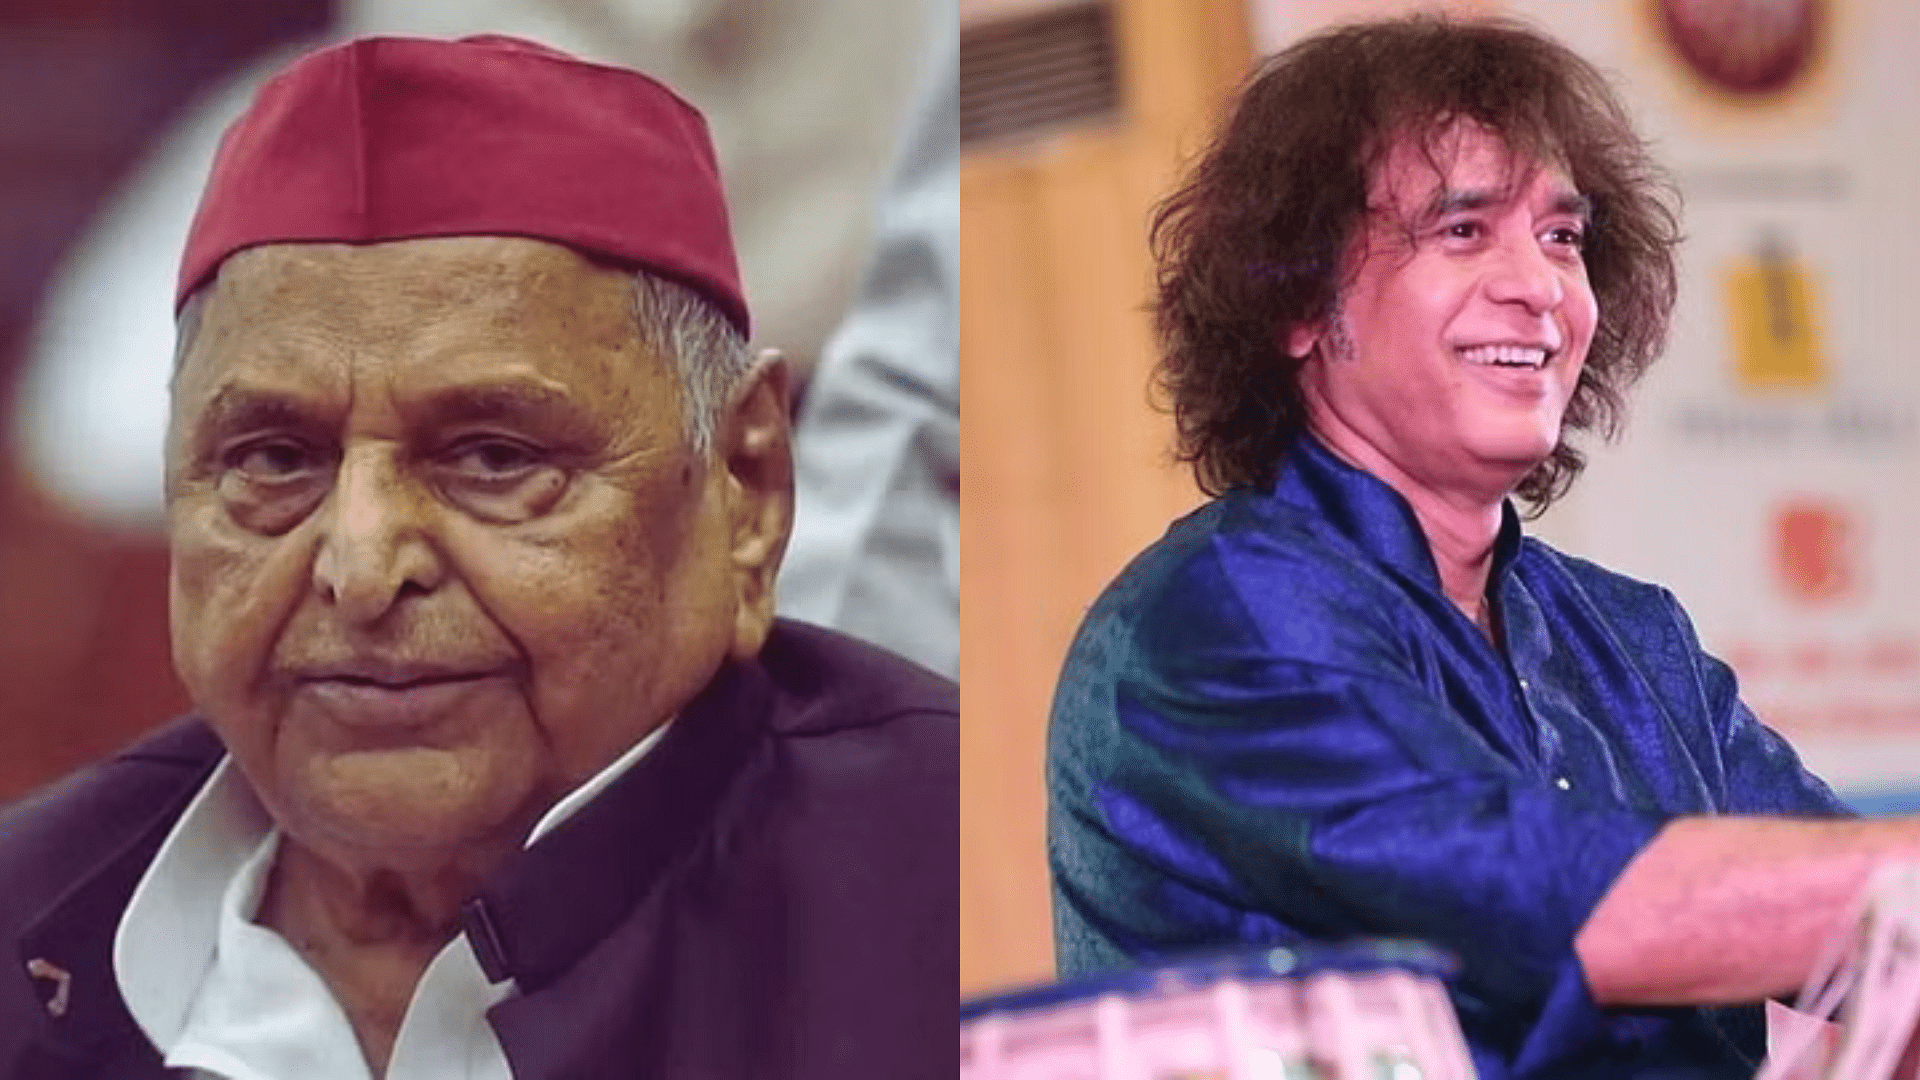 <div class="paragraphs"><p>Former Chief Minister of Uttar Pradesh Mulayam Singh Yadav, and&nbsp;tabla maestro Zakir Hussain&nbsp;are among the six dignitaries who will be conferred with the country's second highest civilian honour – the Padma Vibhushan.</p></div>